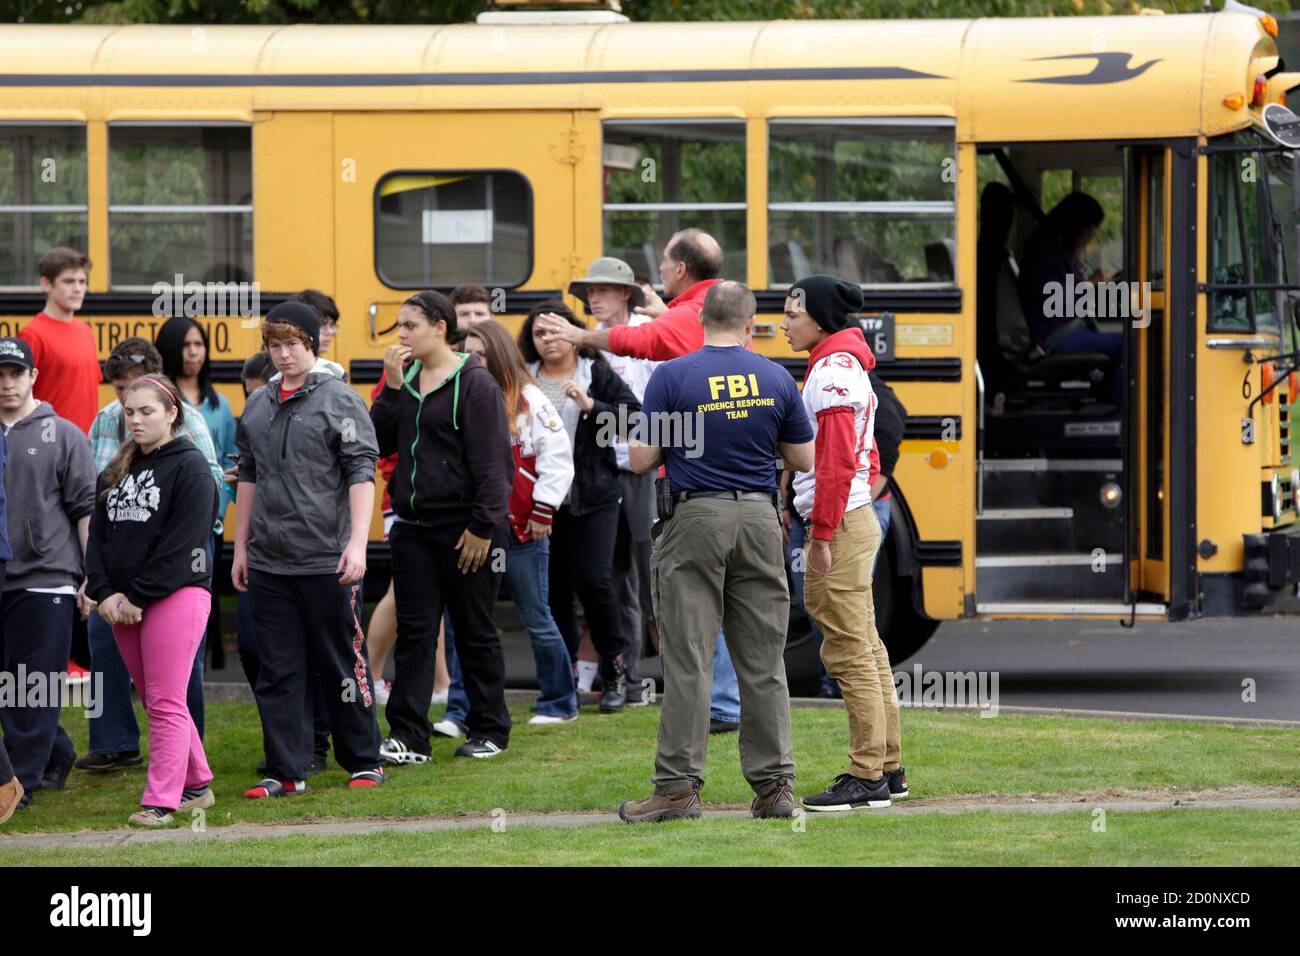 Students exit a bus with an FBI agent (R) speaking to students as they arrive at Shoultes Gospel Hall church after a student opened fire at Marysville-Pilchuck High School in Marysville, Washington October 24, 2014. The student opened fire in the cafeteria of Marysville-Pilchuck High School on Friday, killing a classmate and wounding at least four others before taking his own life amid the chaos of students scrambling to safety, authorities said.   REUTERS/Jason Redmond   (UNITED STATES - Tags: CRIME LAW EDUCATION) Stock Photo